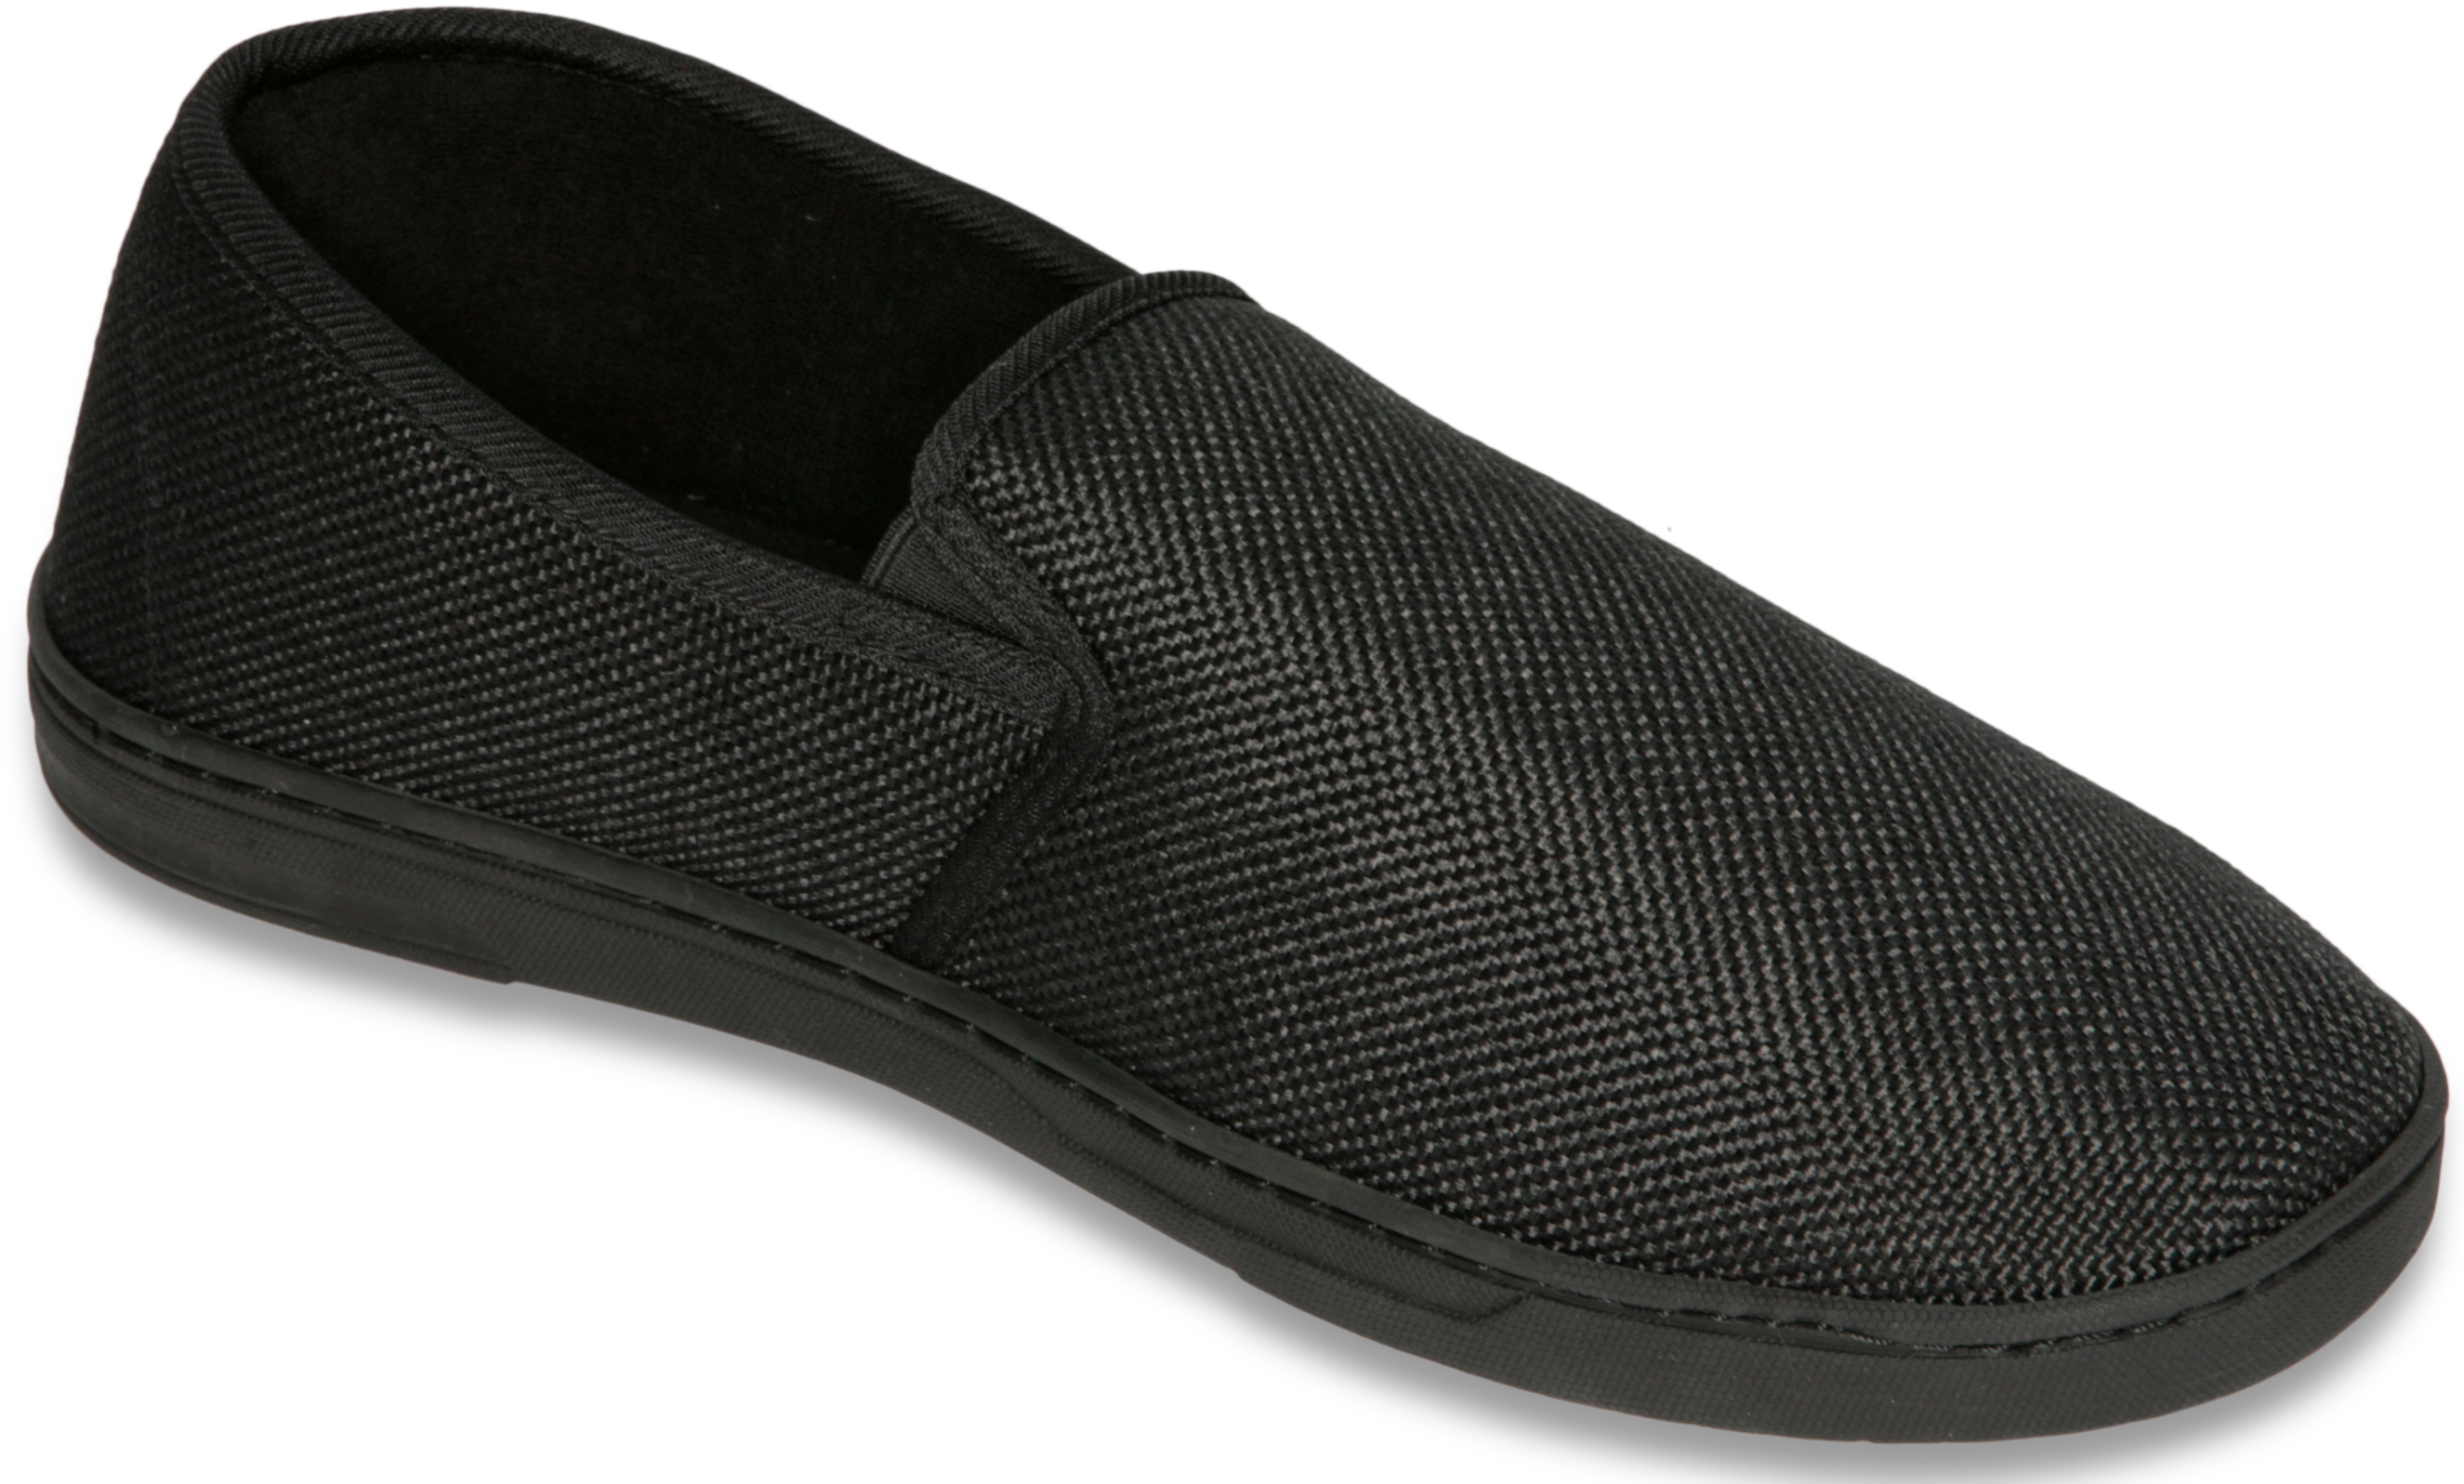 Deluxe Comfort Men's Memory Foam Slipper, Size 9-10 - Suede Vamp Checkered Lining - Memory Foam Insole - Strong TPR Outsole - Mens Slippers, Black - image 1 of 5